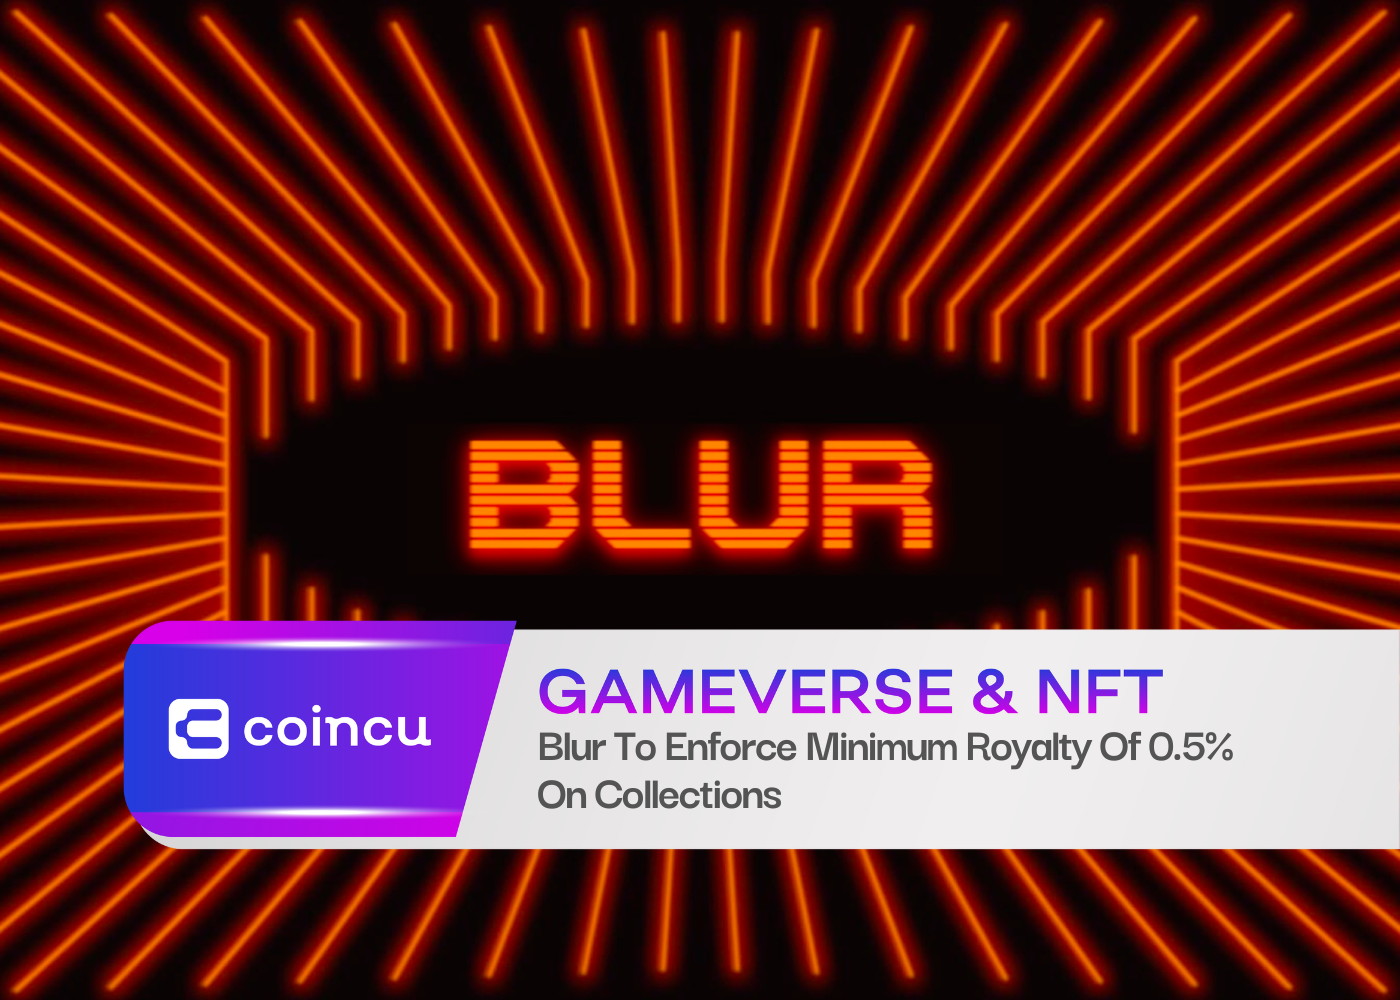 Blur To Enforce Minimum Royalty Of 0.5% On Collections